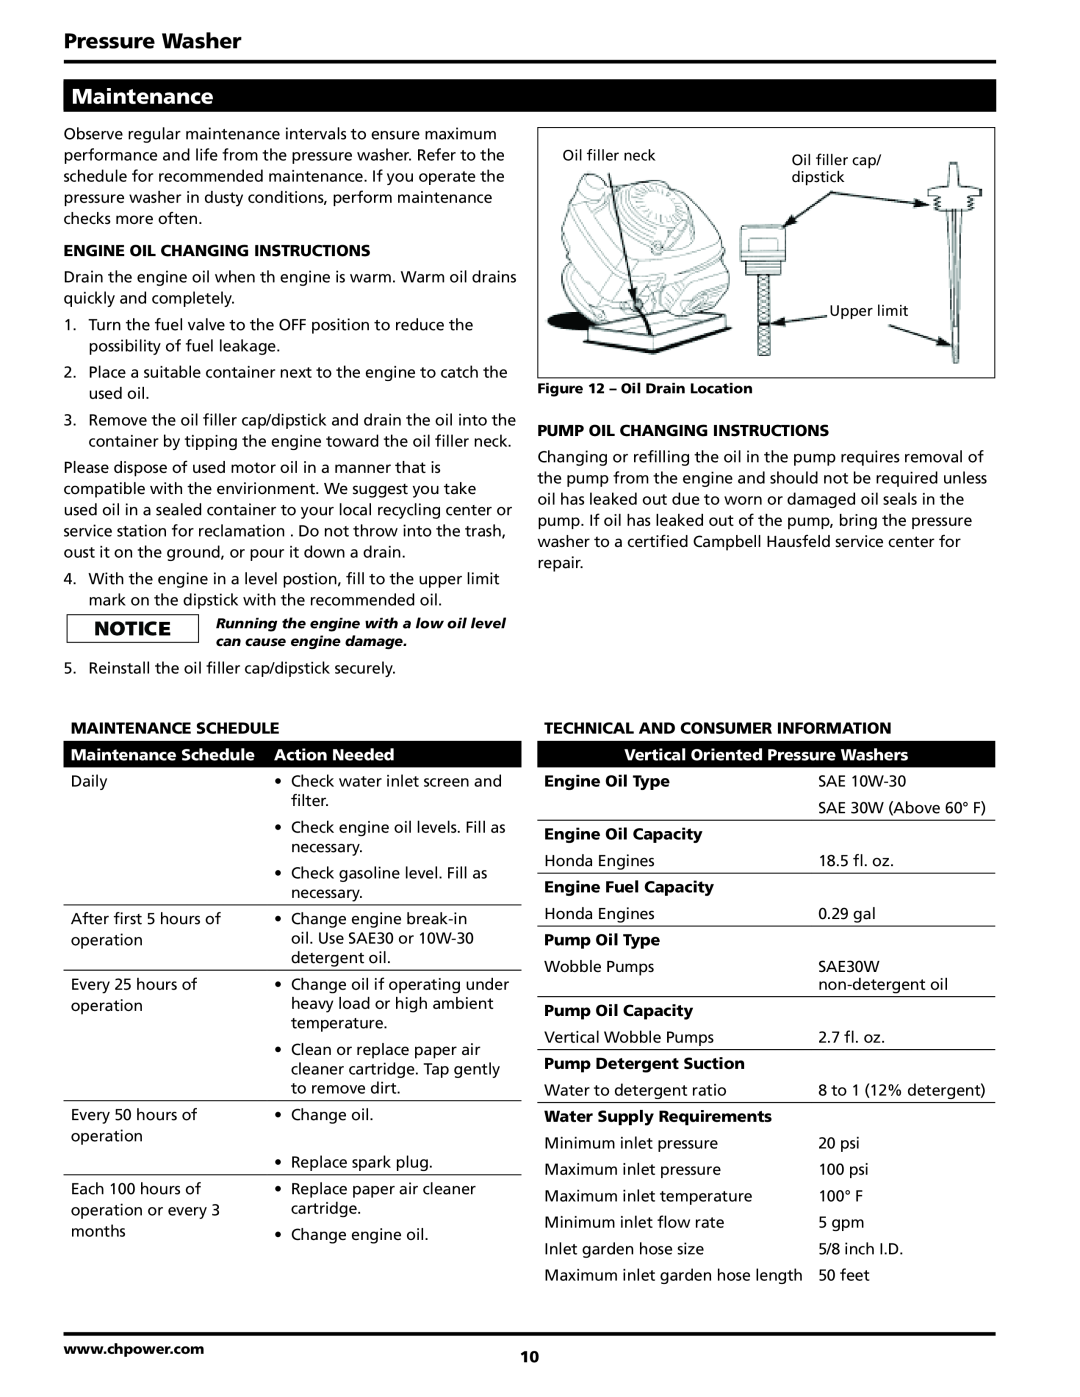 Campbell Hausfeld PW2570 Pressure Washer, Maintenance, engine Oil changing instructions, pump Oil changing instructions 